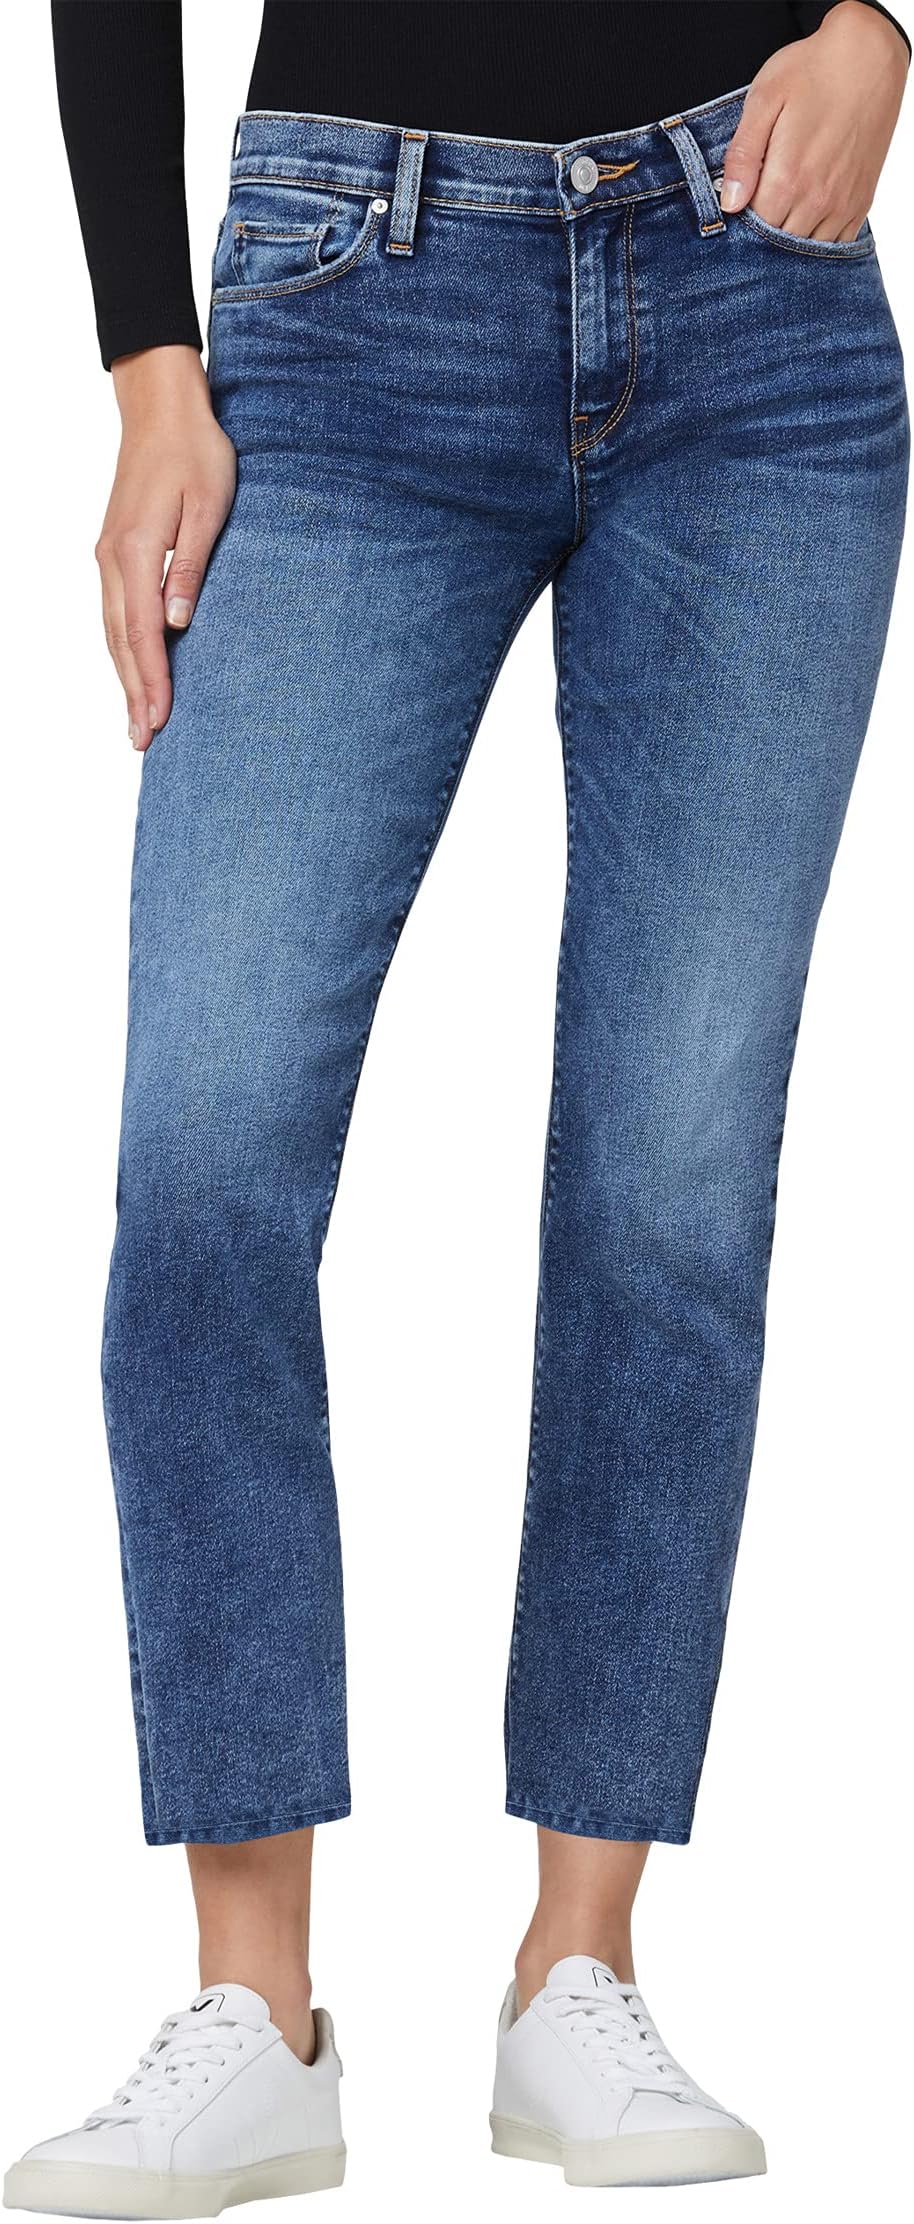 Джинсы Nico Mid-Rise Straight Ankle in Journey Home Hudson Jeans, цвет Journey Home pennypacker s pax journey home